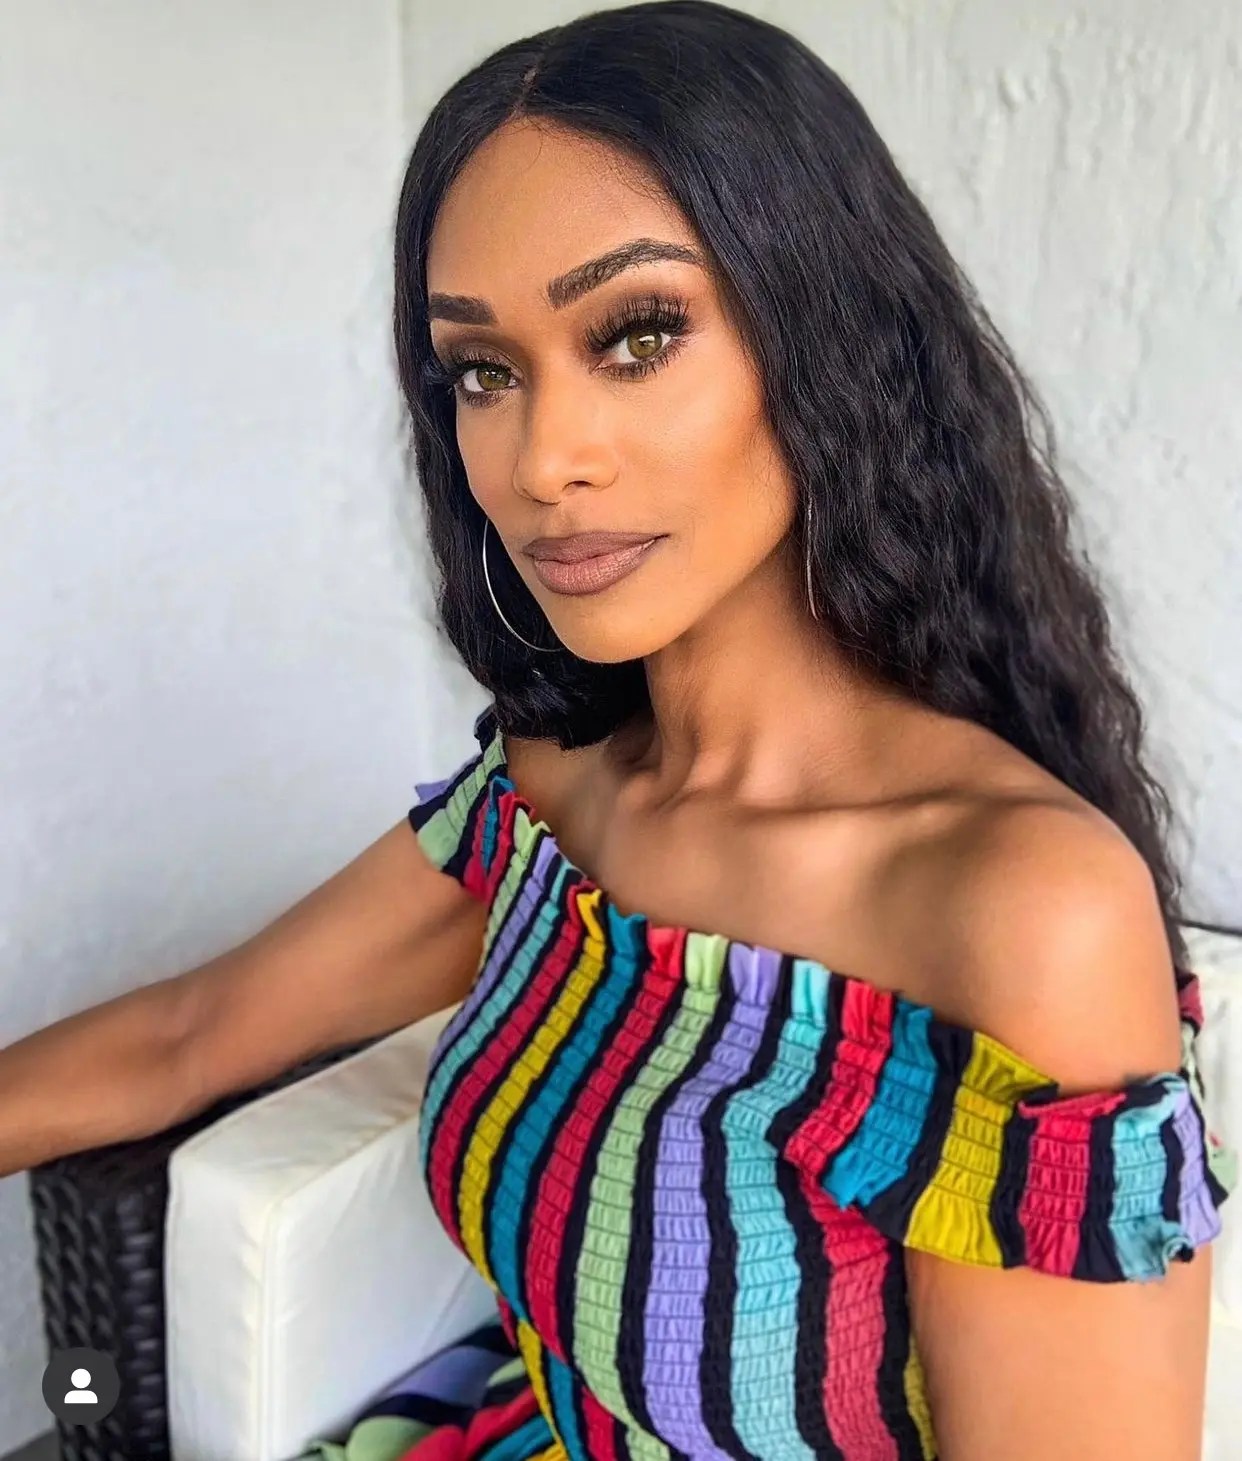 Is Tami Roman Sick? The 'Haus of Vicious' Star Prompts Concern